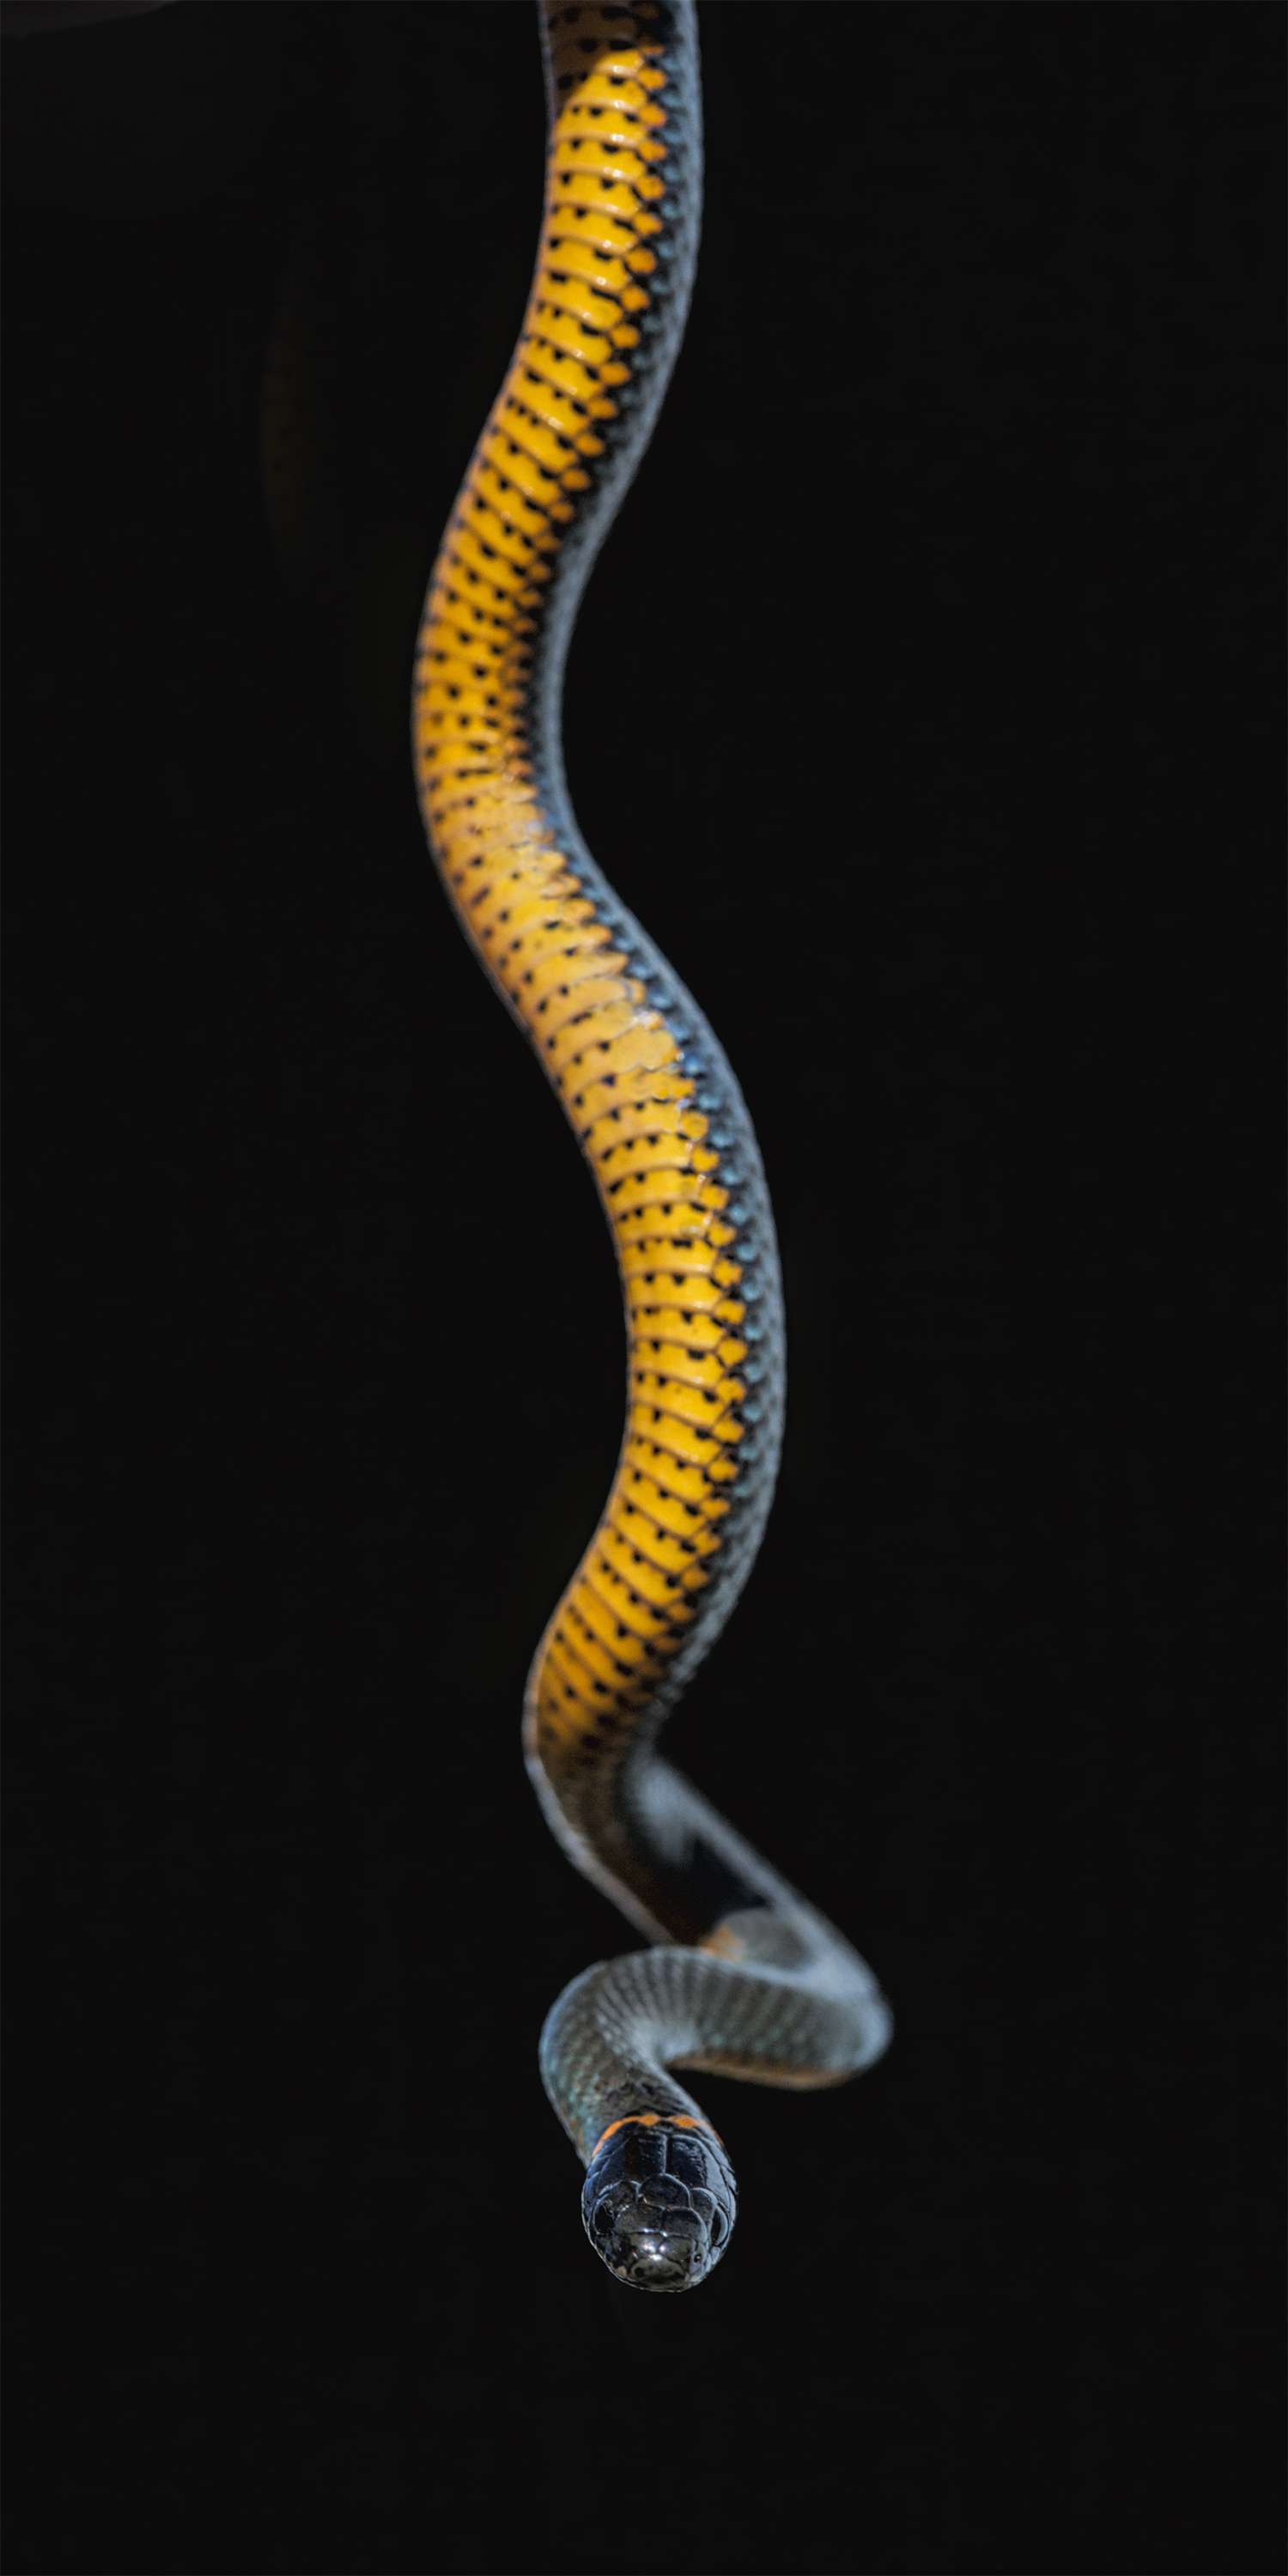 Ring-necked Snake Northern California